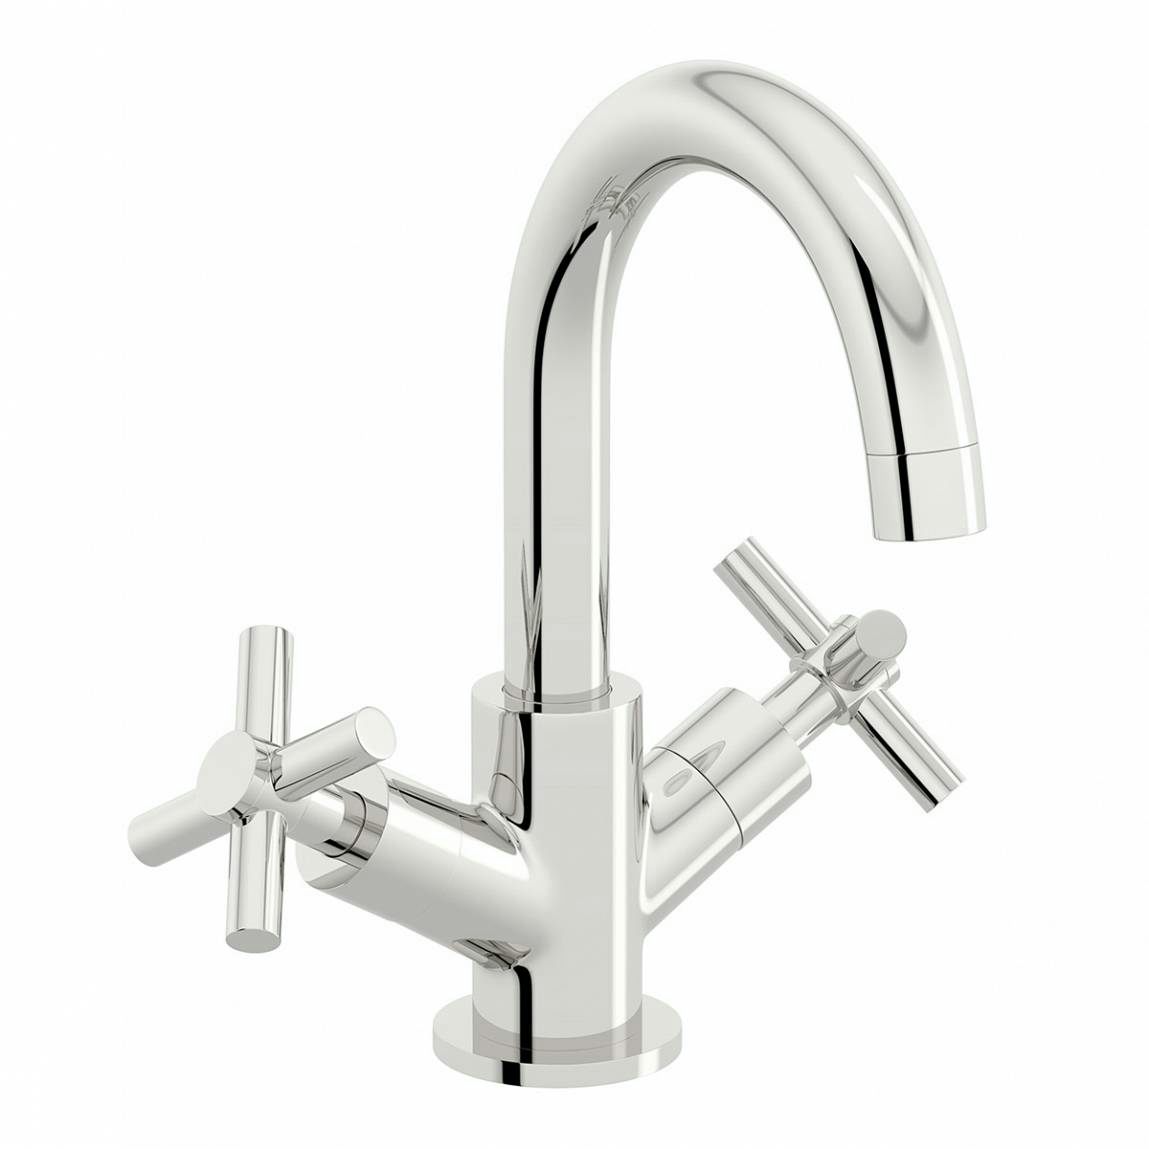 Mode Tate basin mixer tap with unslotted waste